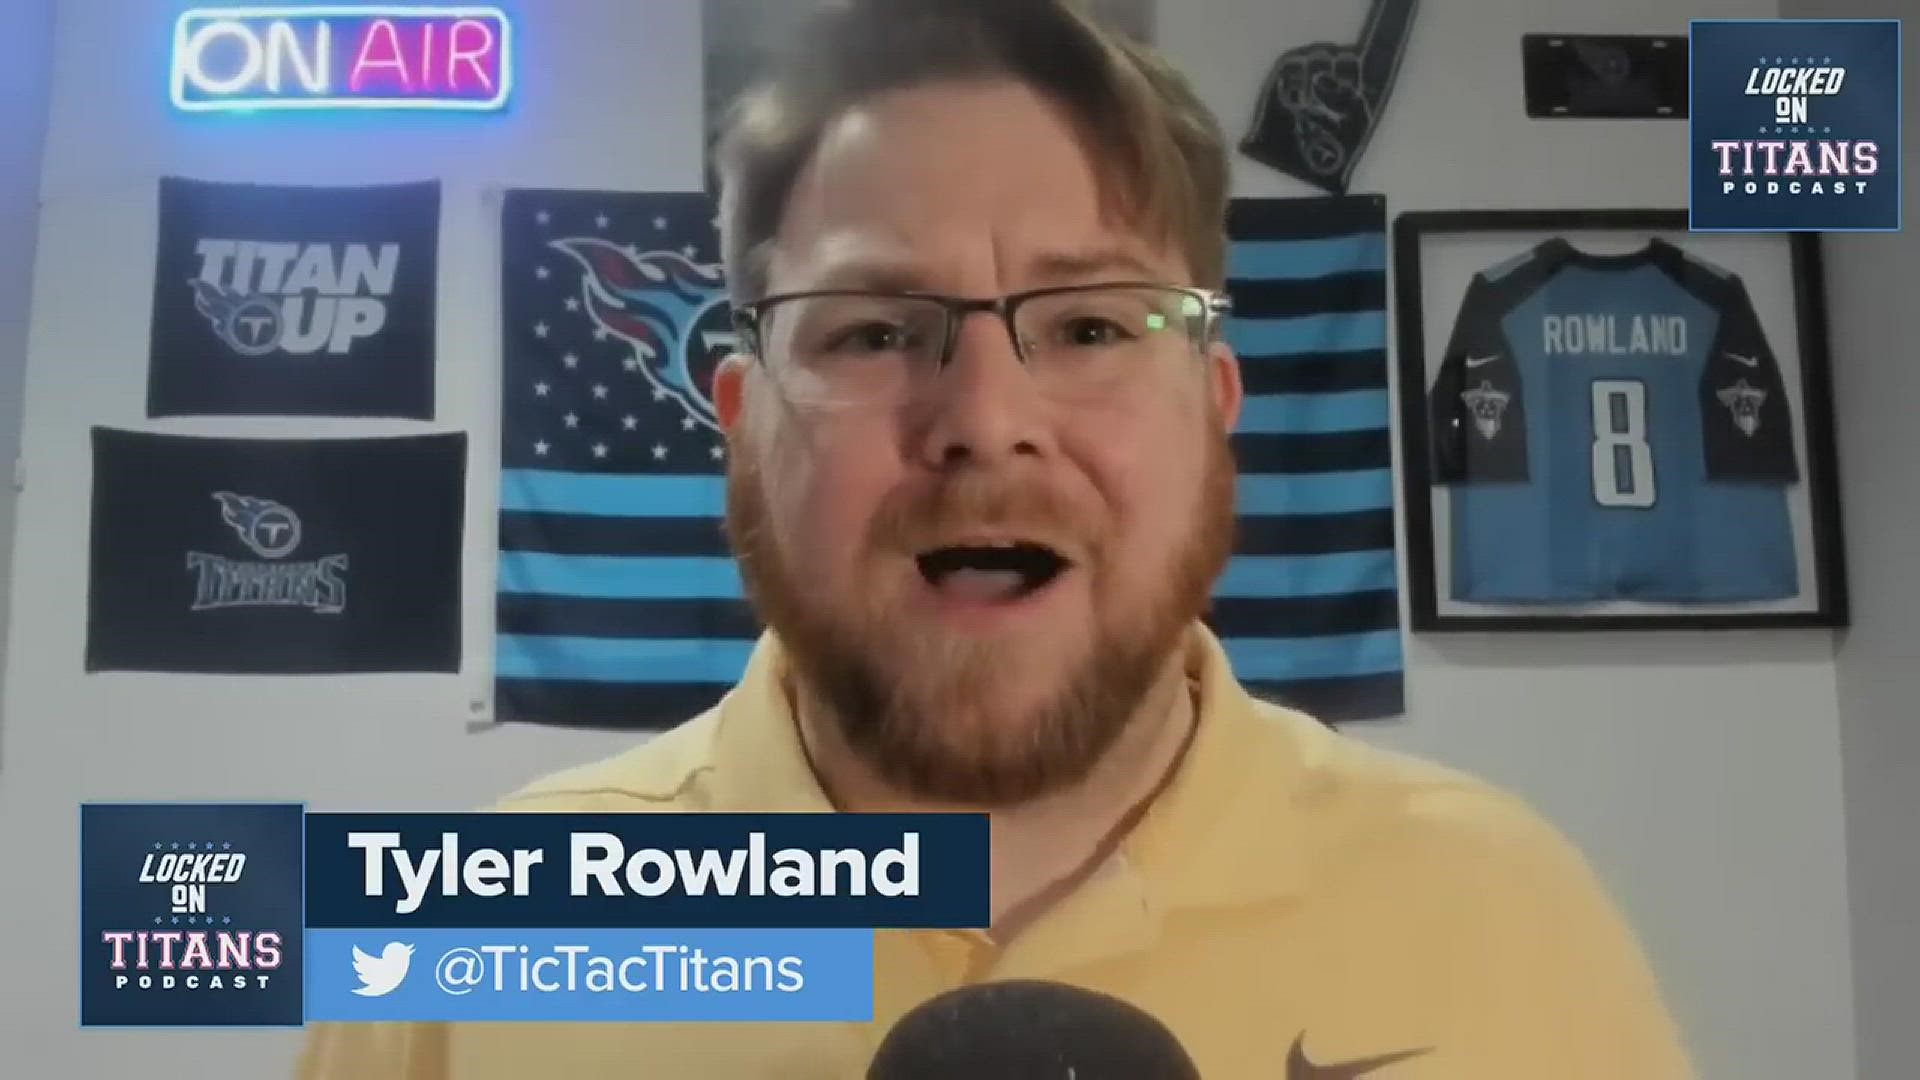 If you're the Titans, who would you rather have, Tom Brady or Aaron Rodgers? Locked On Titans host Tyler Rowland says the choice is obvious.